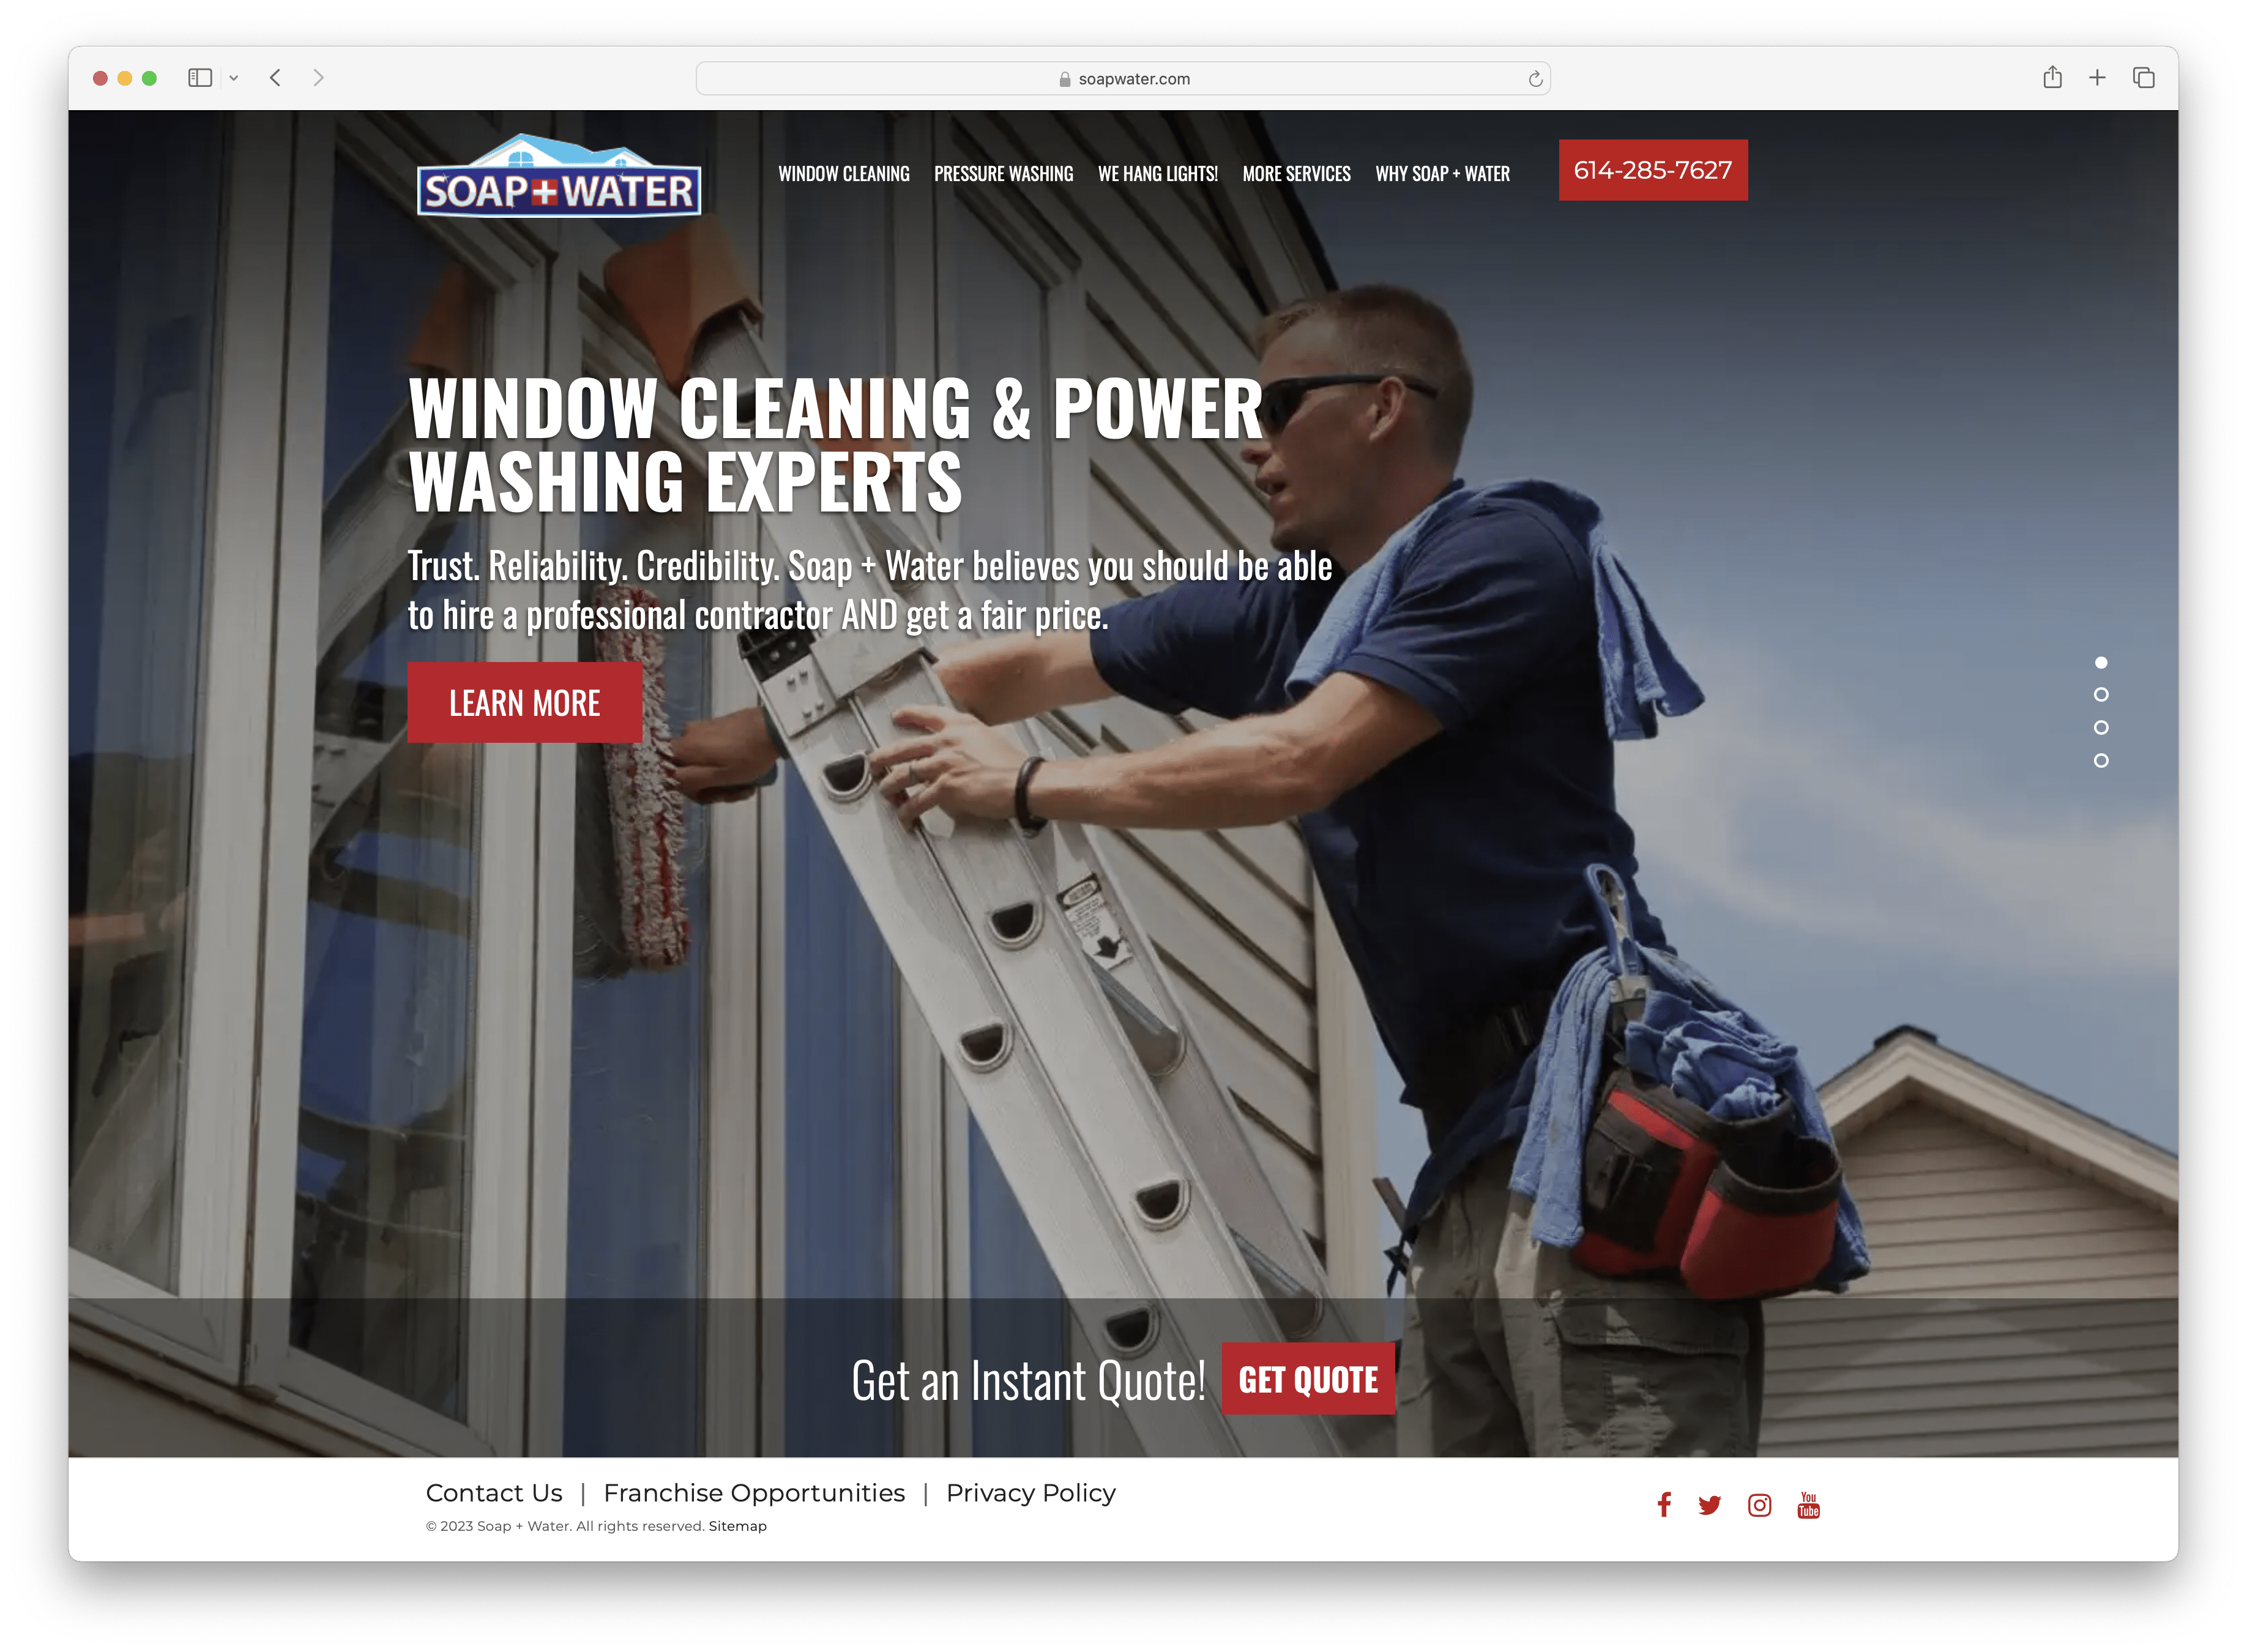 Soap + Water - windows cleaning and power washing website